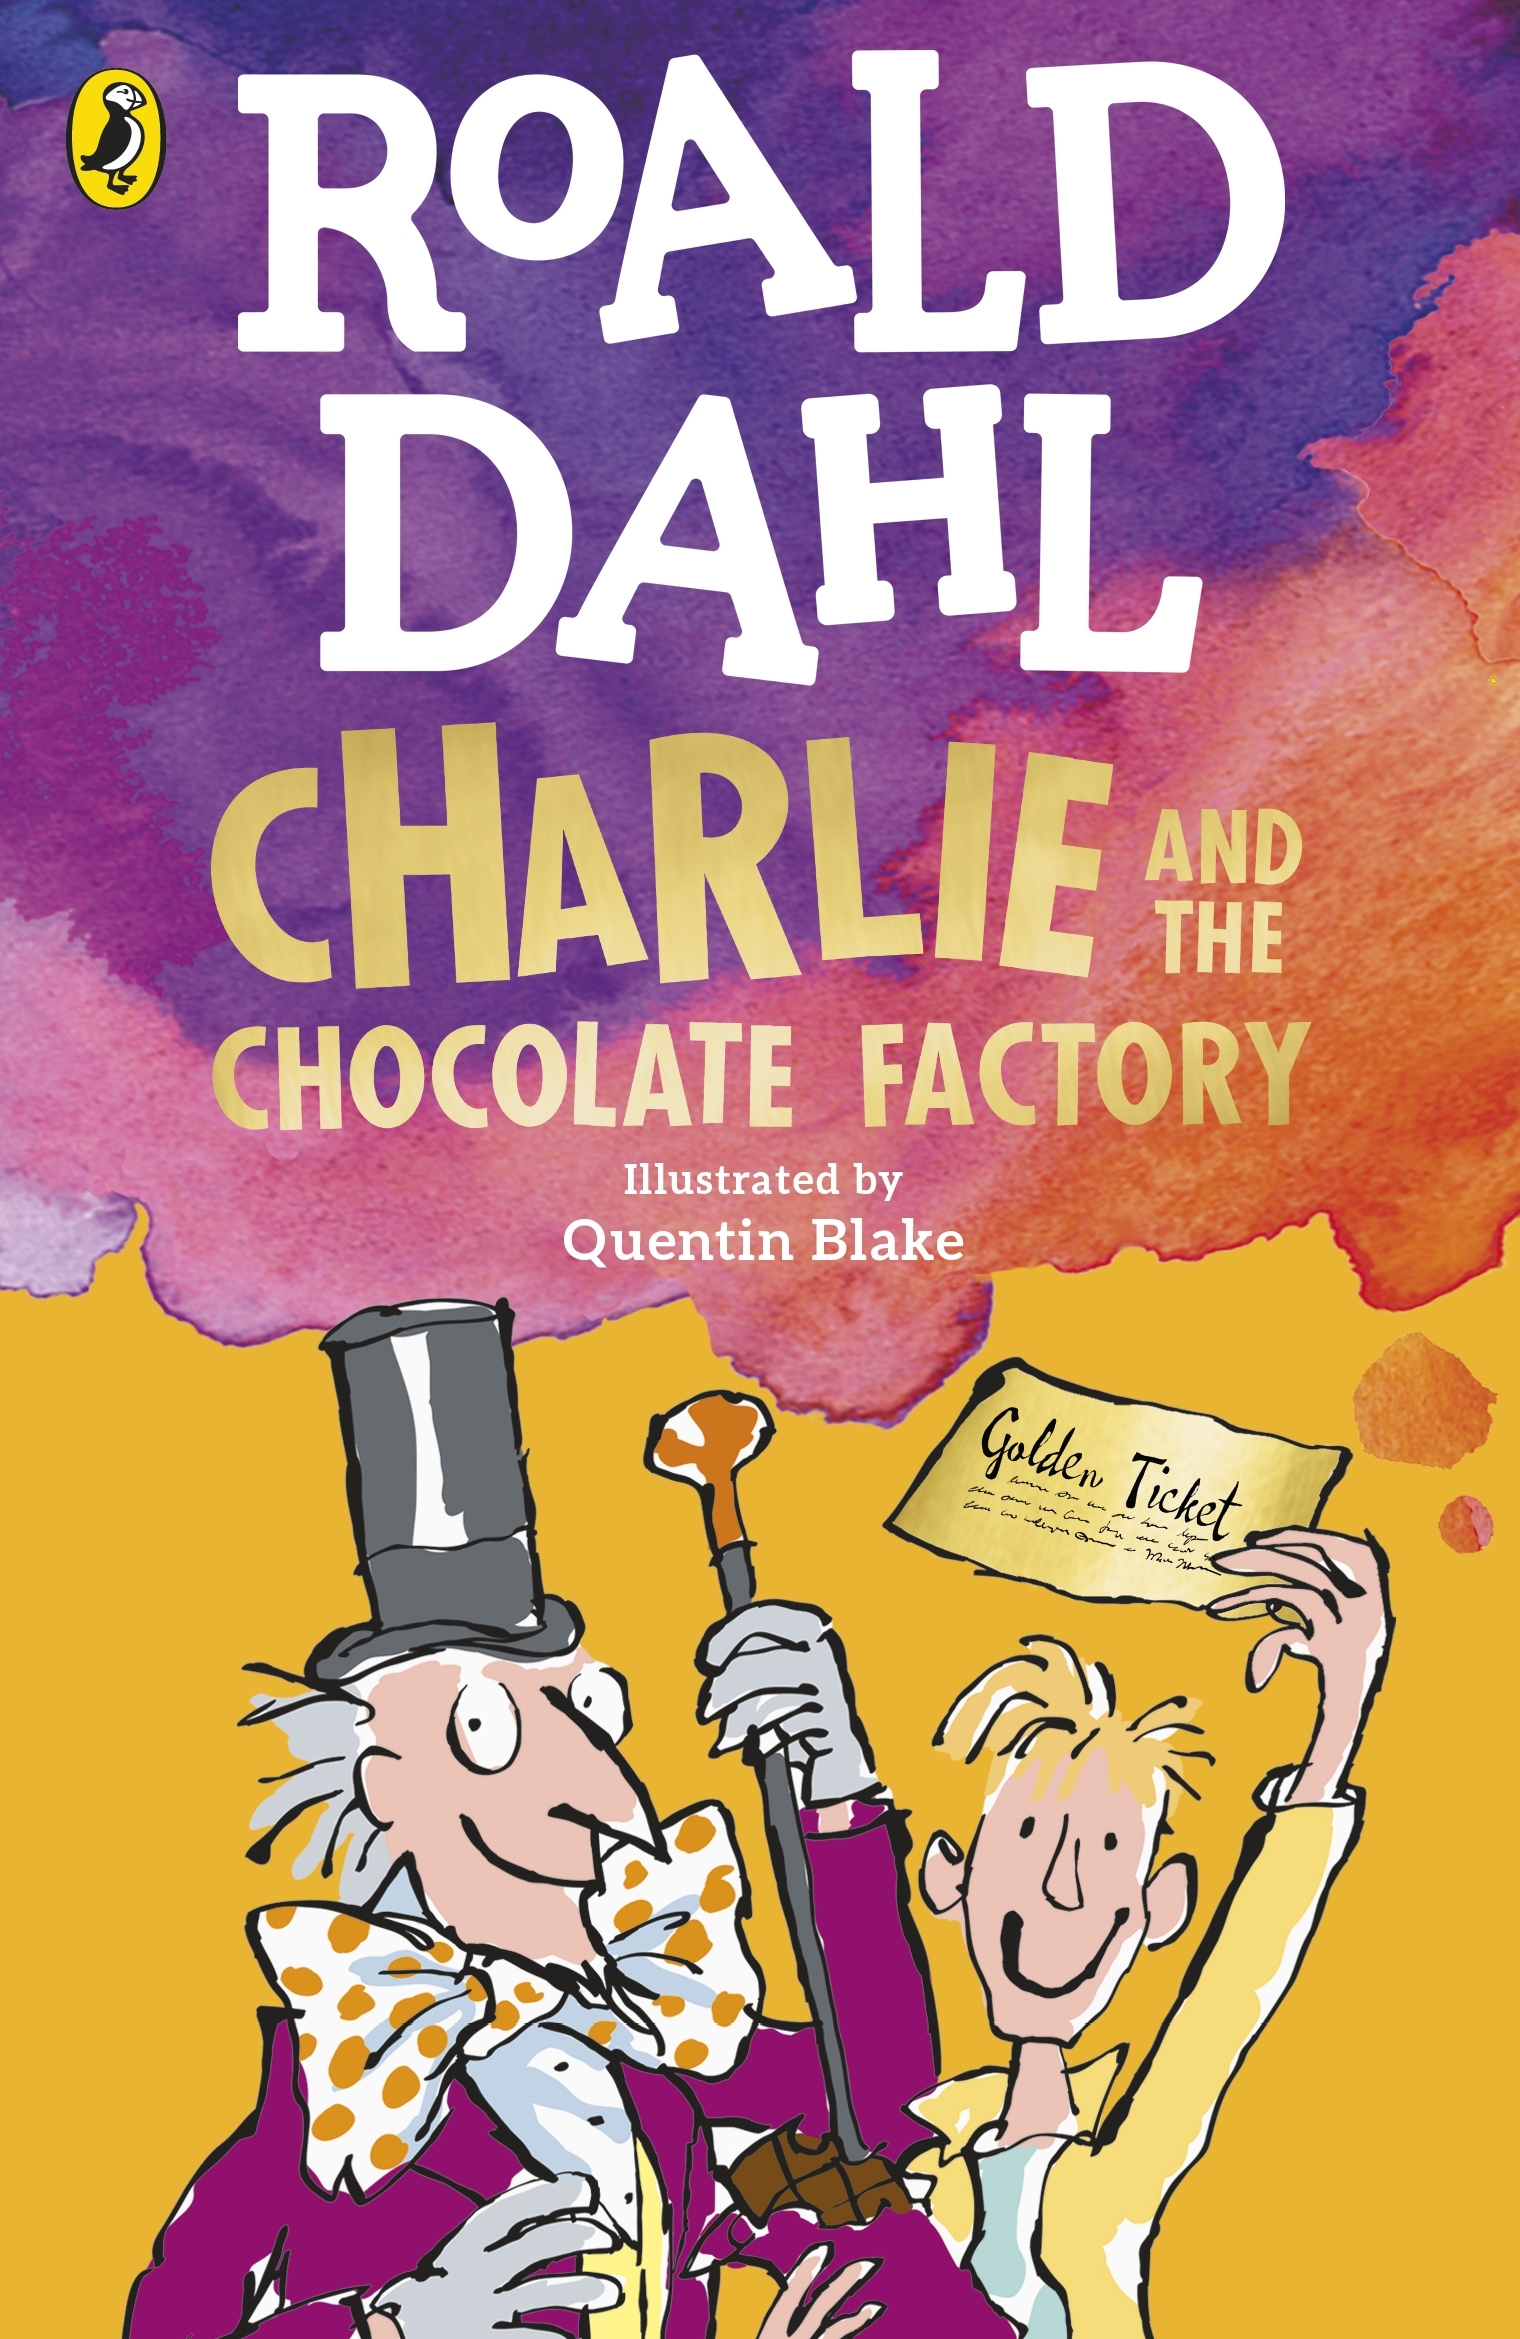 a book review of charlie and the chocolate factory